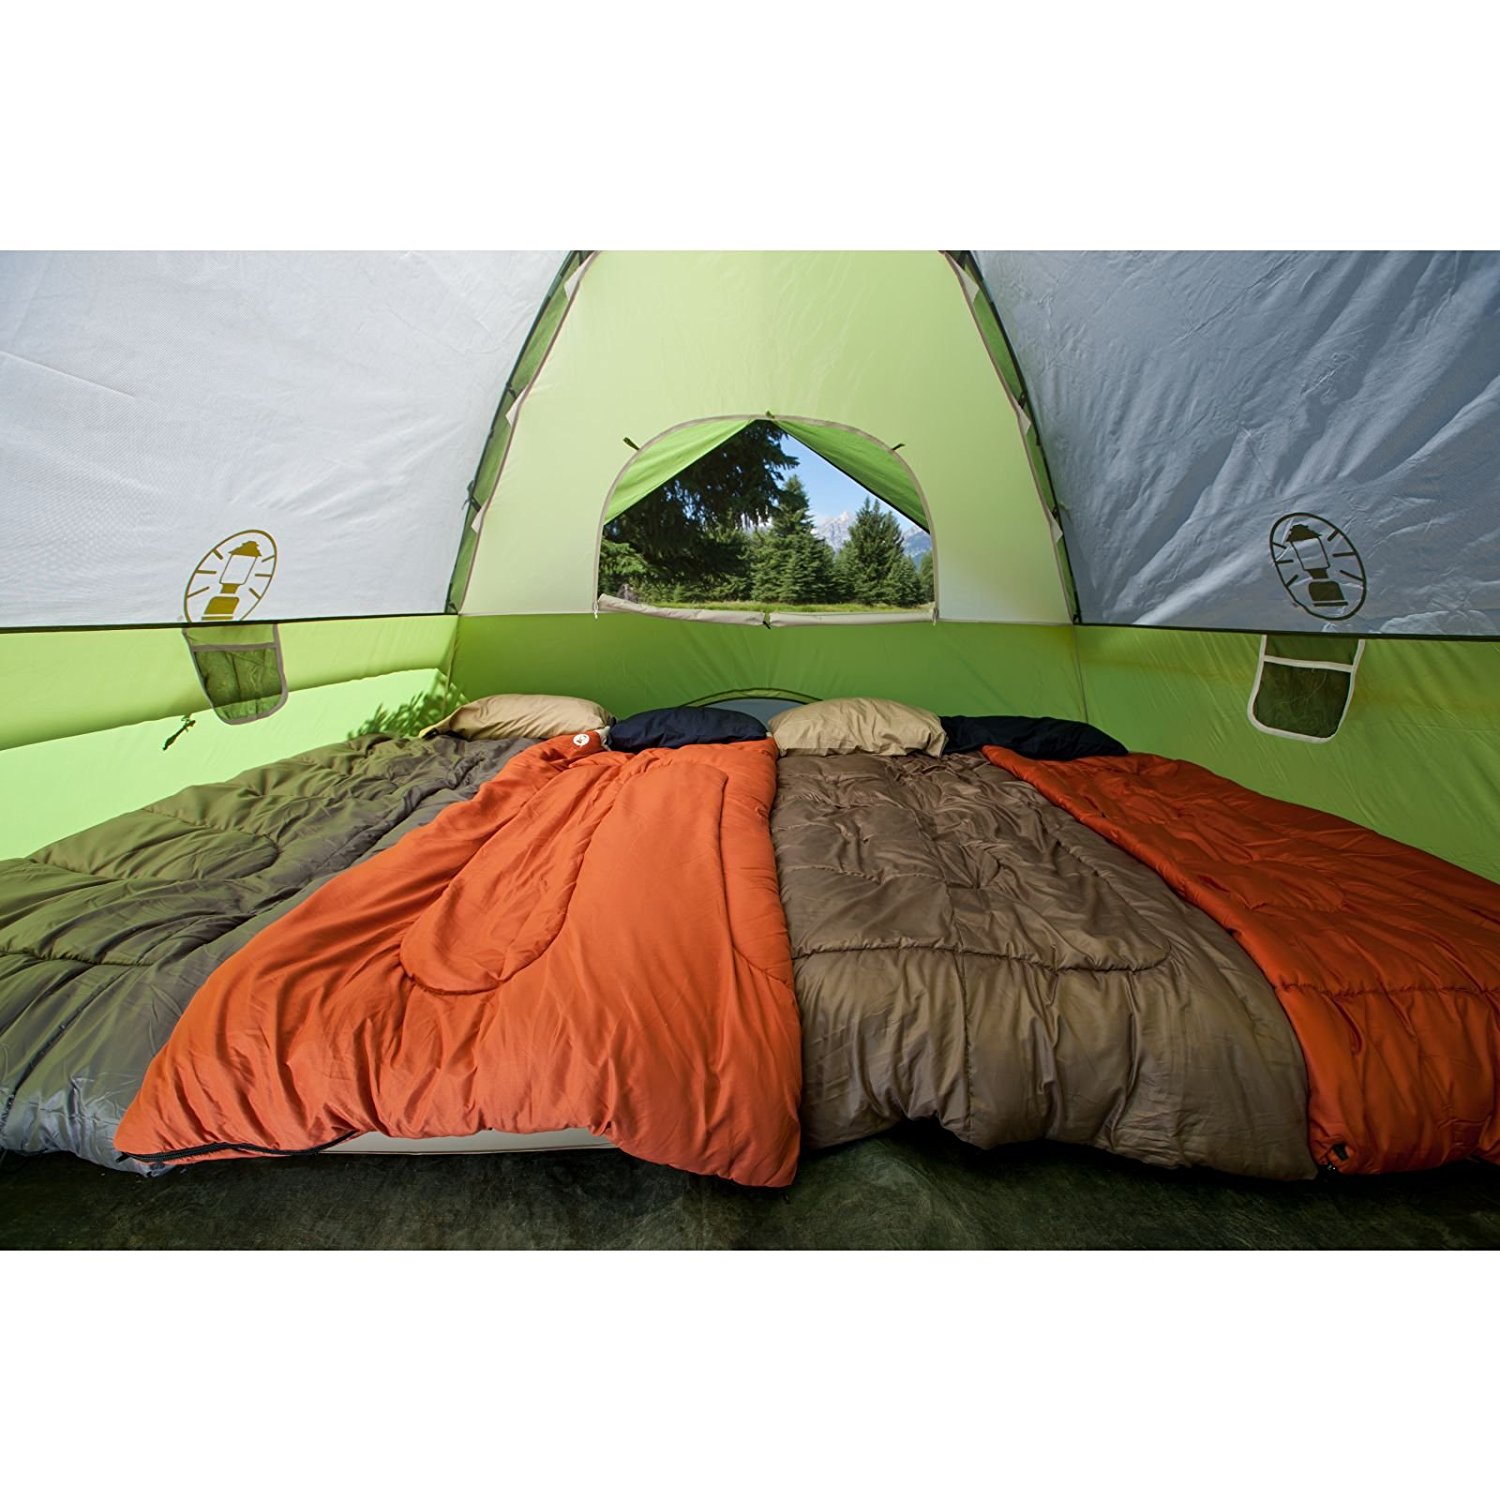 Up to 40% OFF Coleman Camping Gear! 6-Person Tent Just $65.14!!